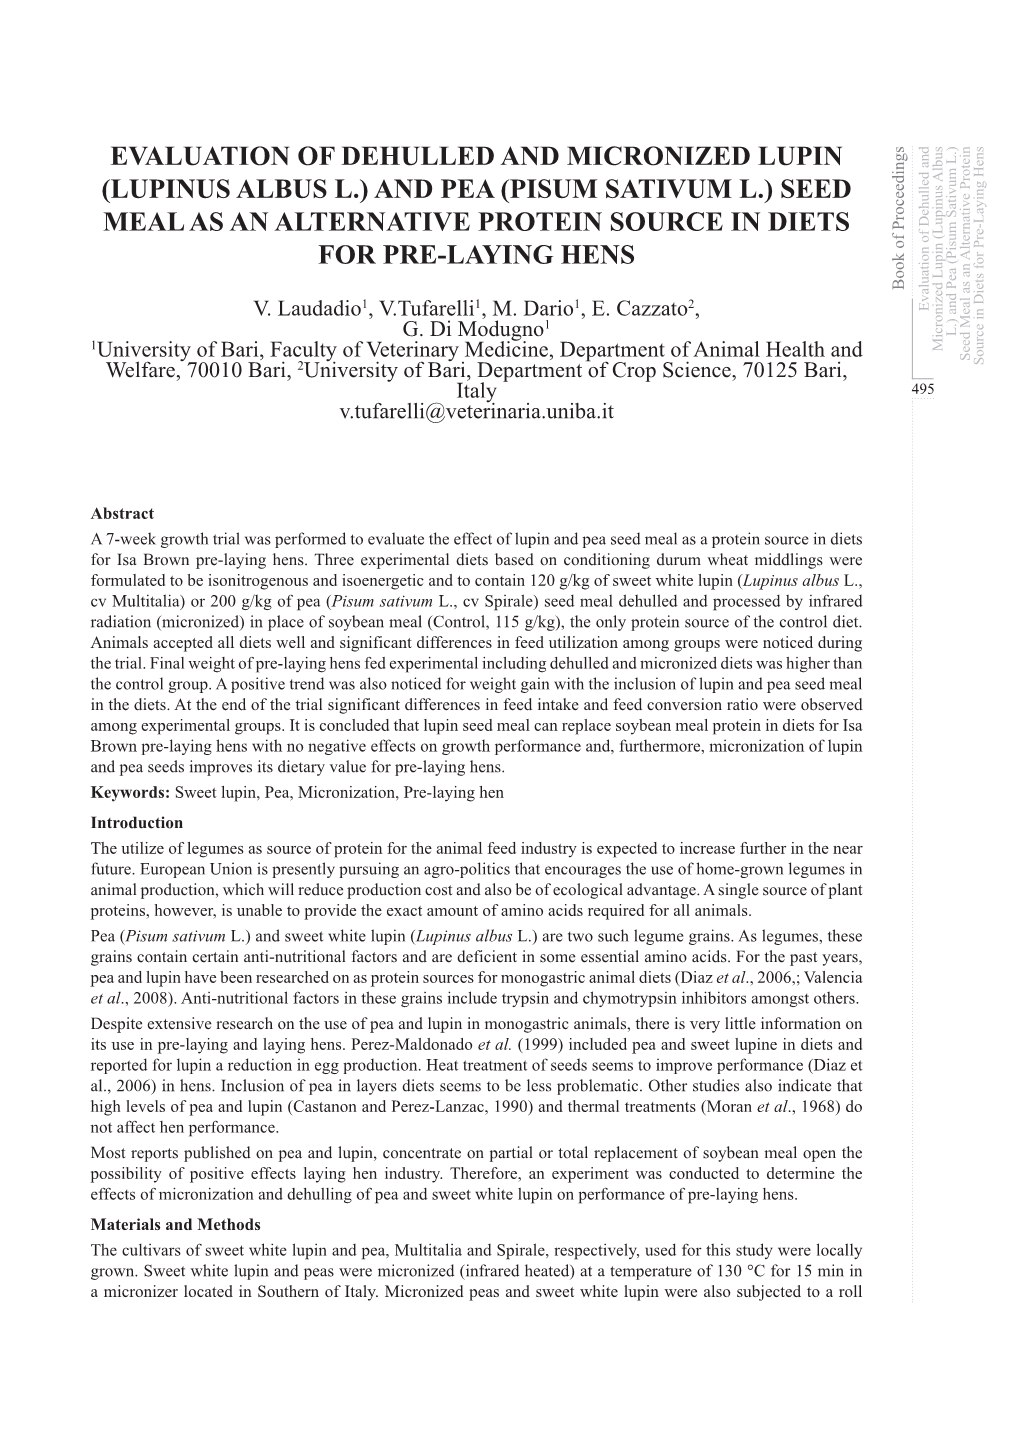 (Lupinus Albus L.) and Pea (Pisum Sativum L.) Seed Meal As an Alternative Protein Source in Diets for Pre-Laying Hens Process Before Being Ground for Use